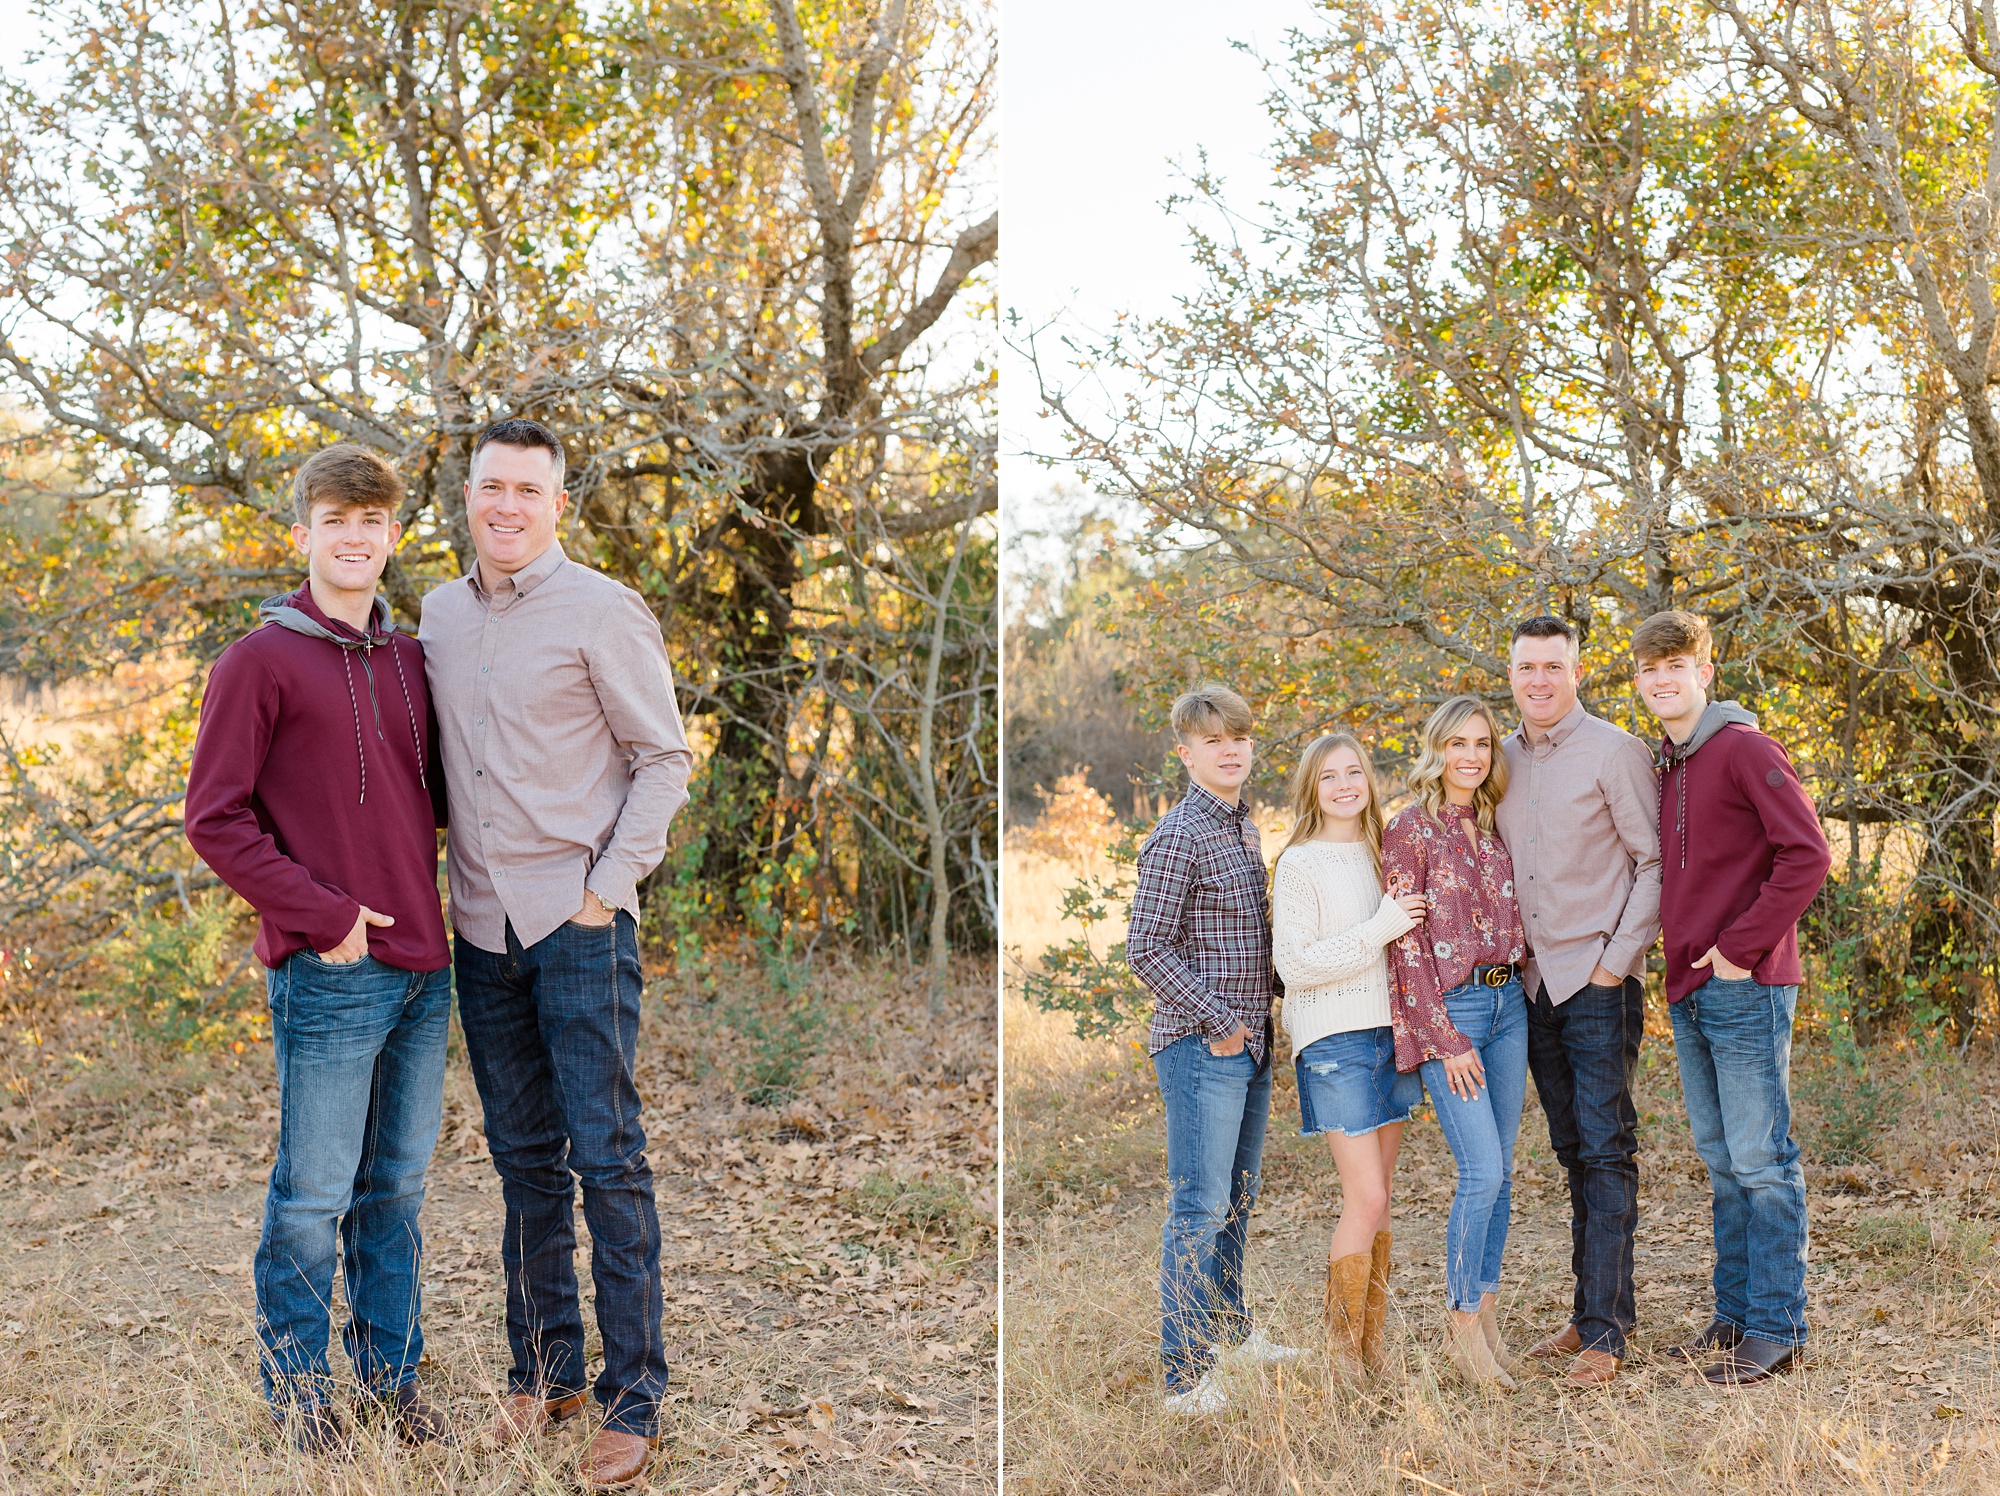 Murrell Park family session during the fall